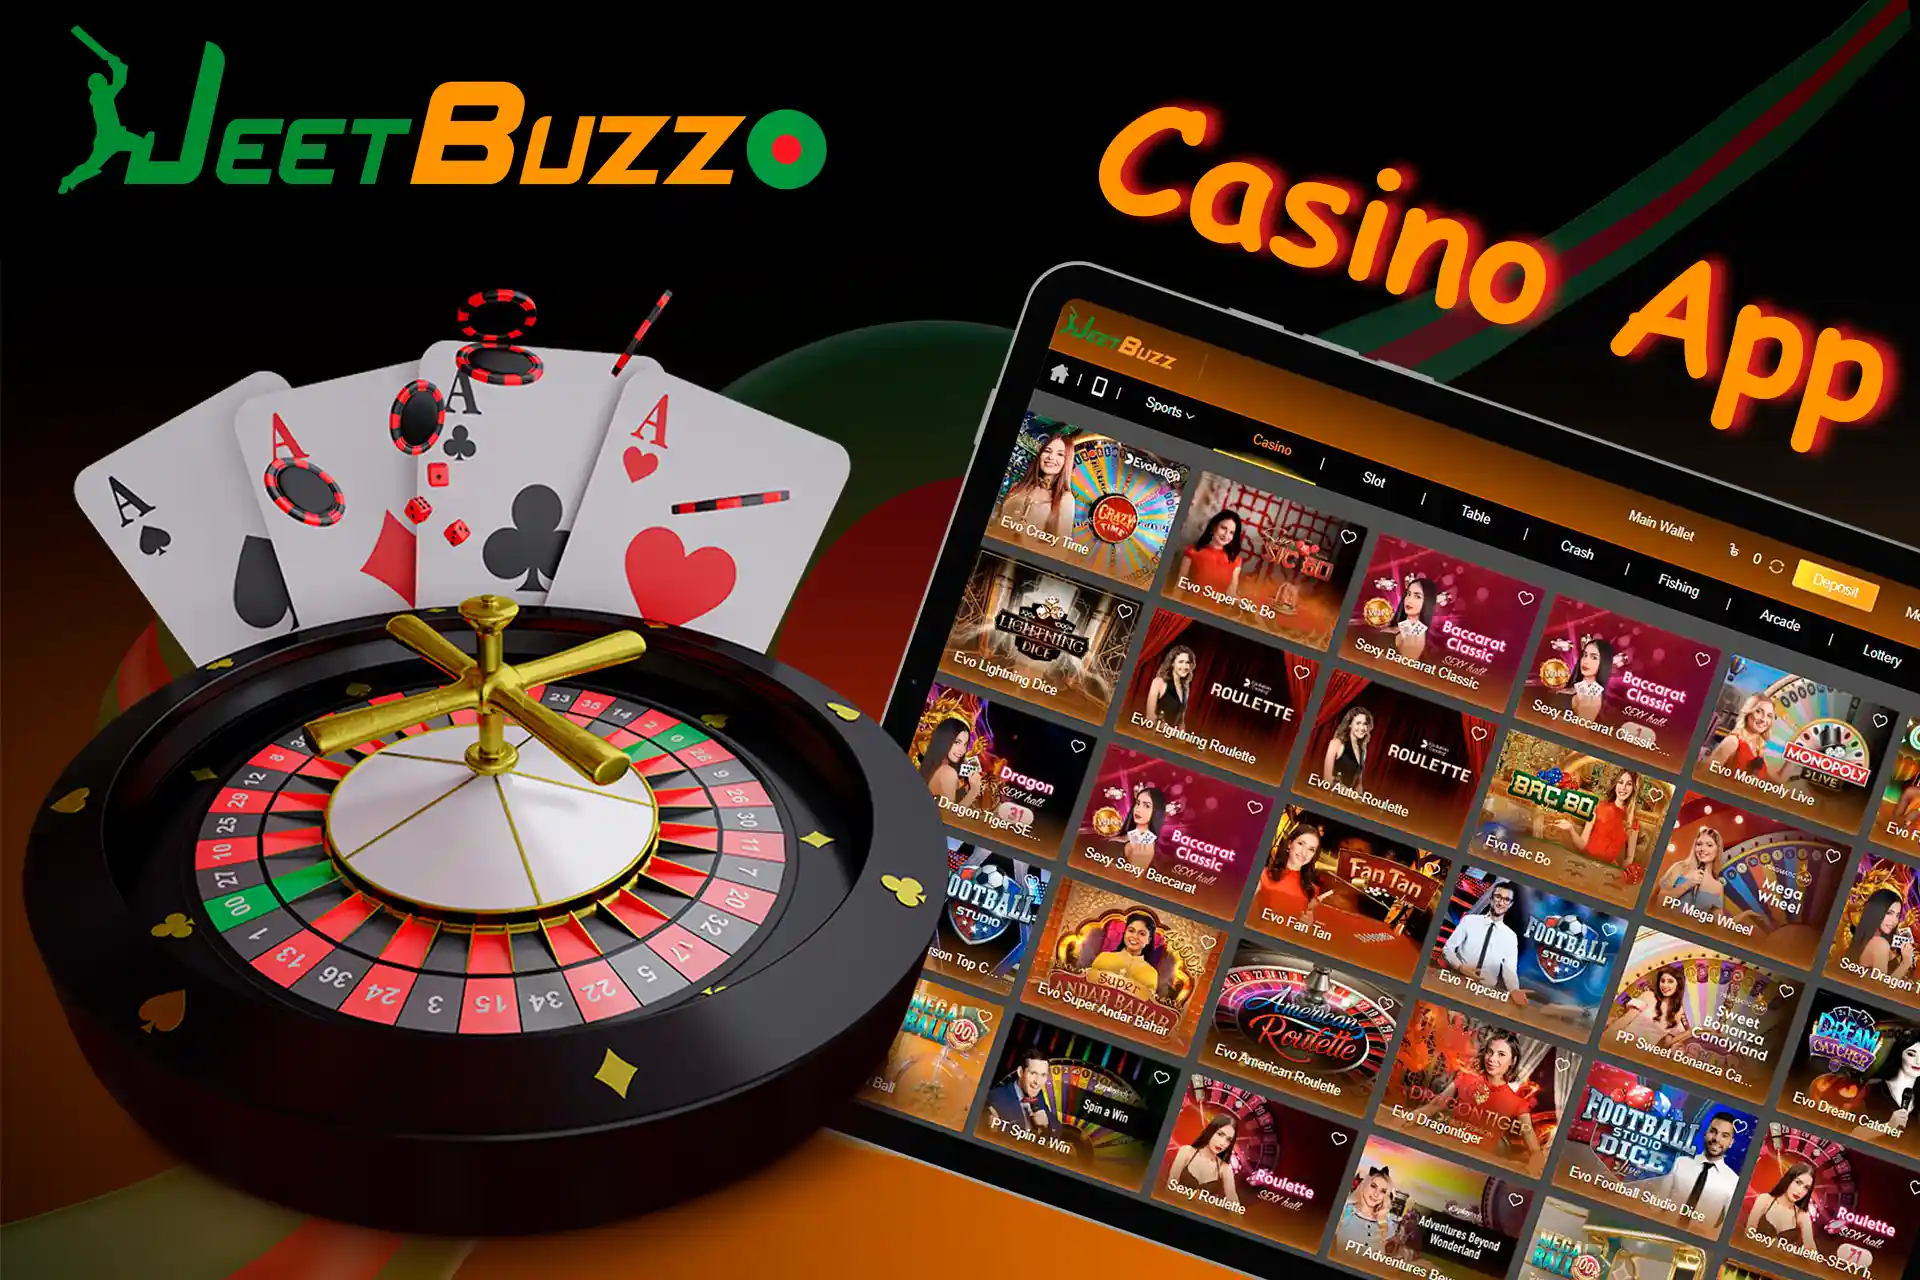 Basic Information About JeetBuzz Casino App